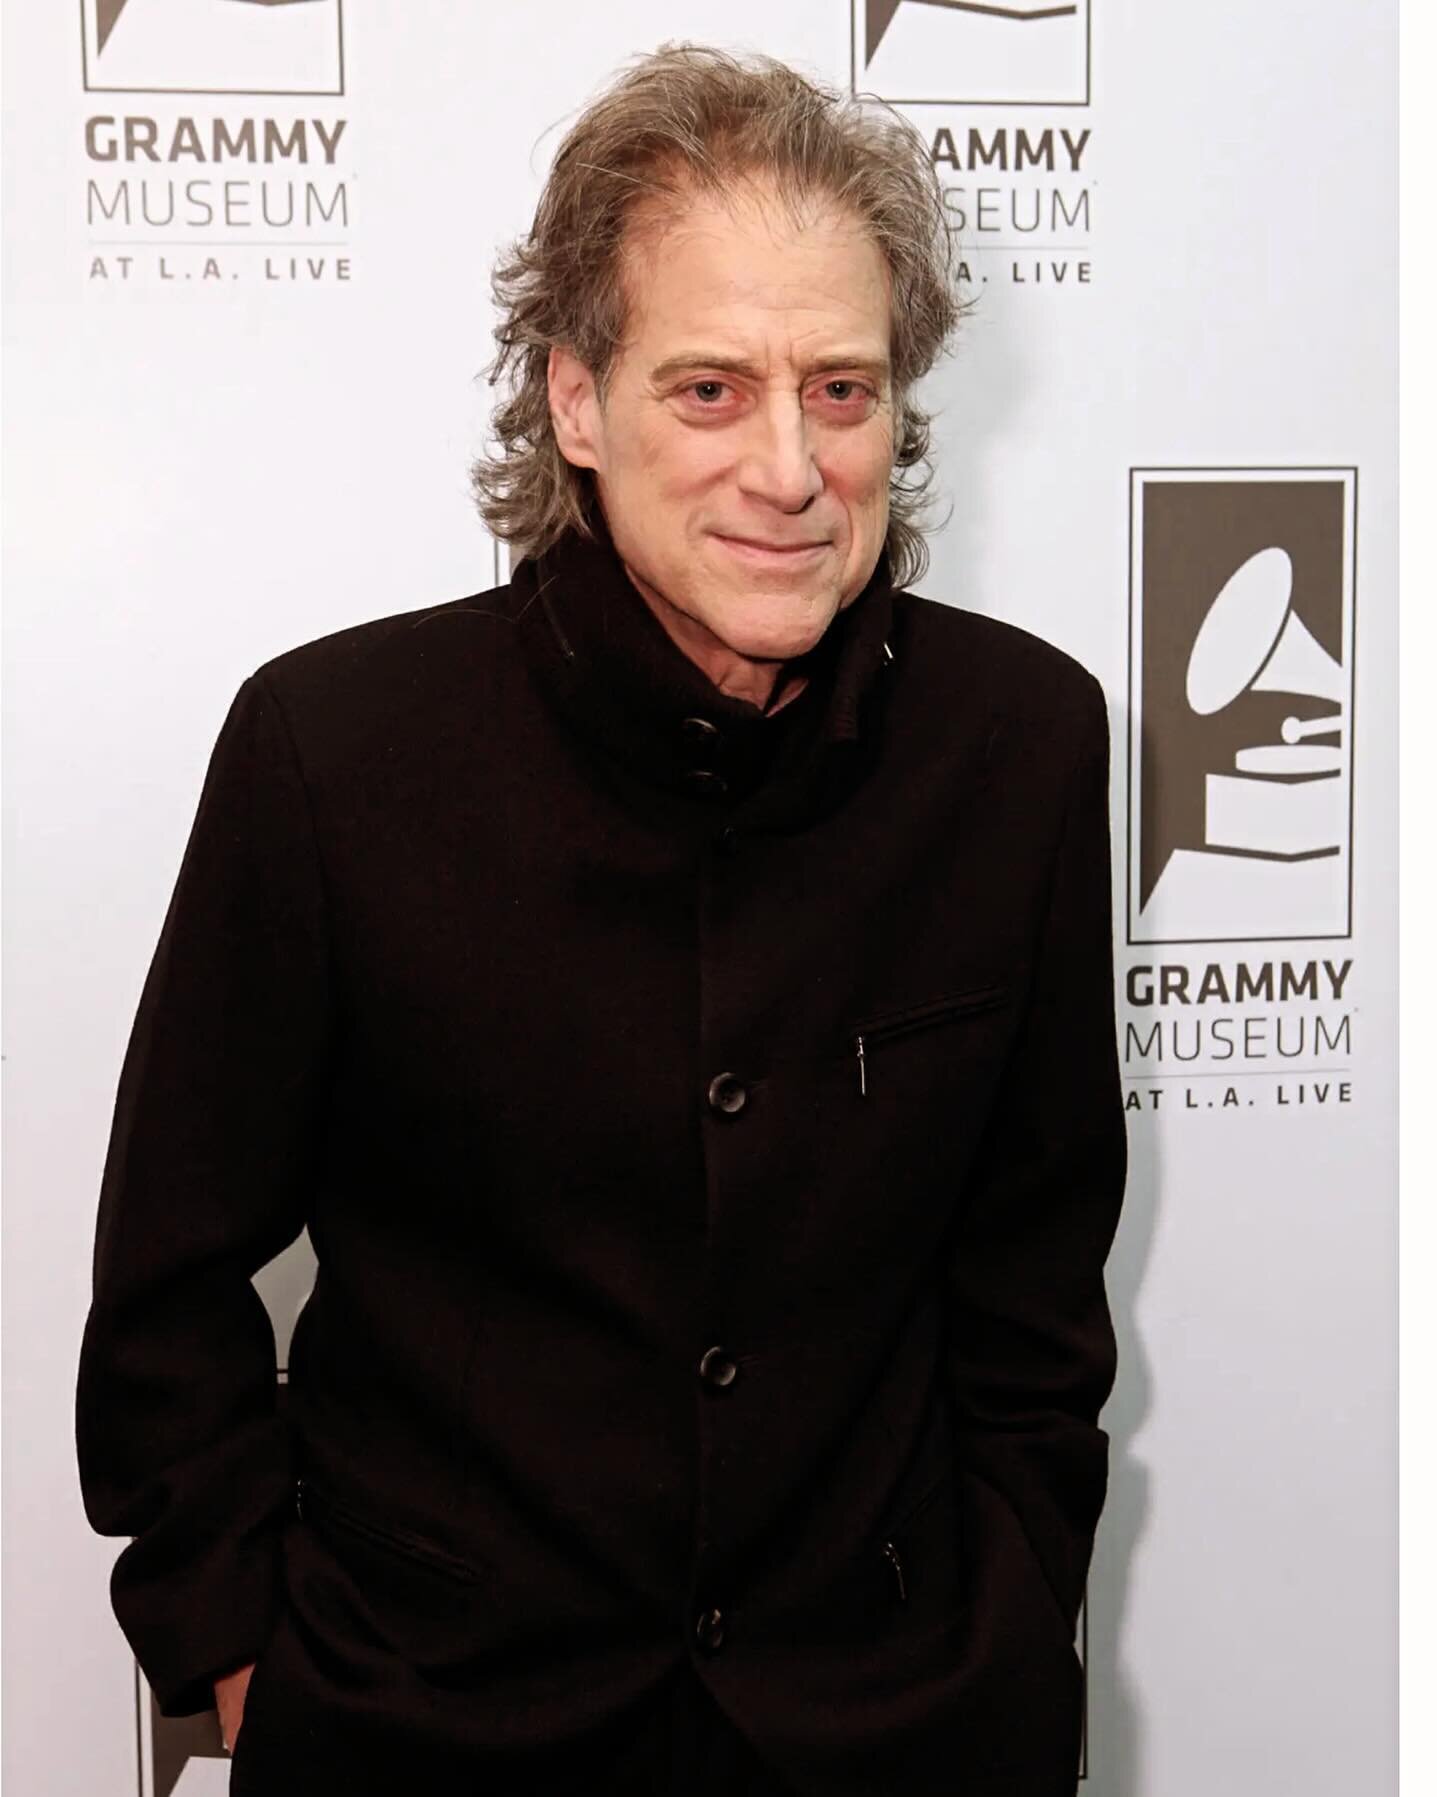 An ICONIC Comic that will be deeply missed. RICHARD LEWIS was not only an amazing stand up comedian, but the STAR on @curbyourenthusiasm . Loved him @grammymuseum as he was so incredibly kind, thoughtful and generous.  RIP .  I am sure he is making e